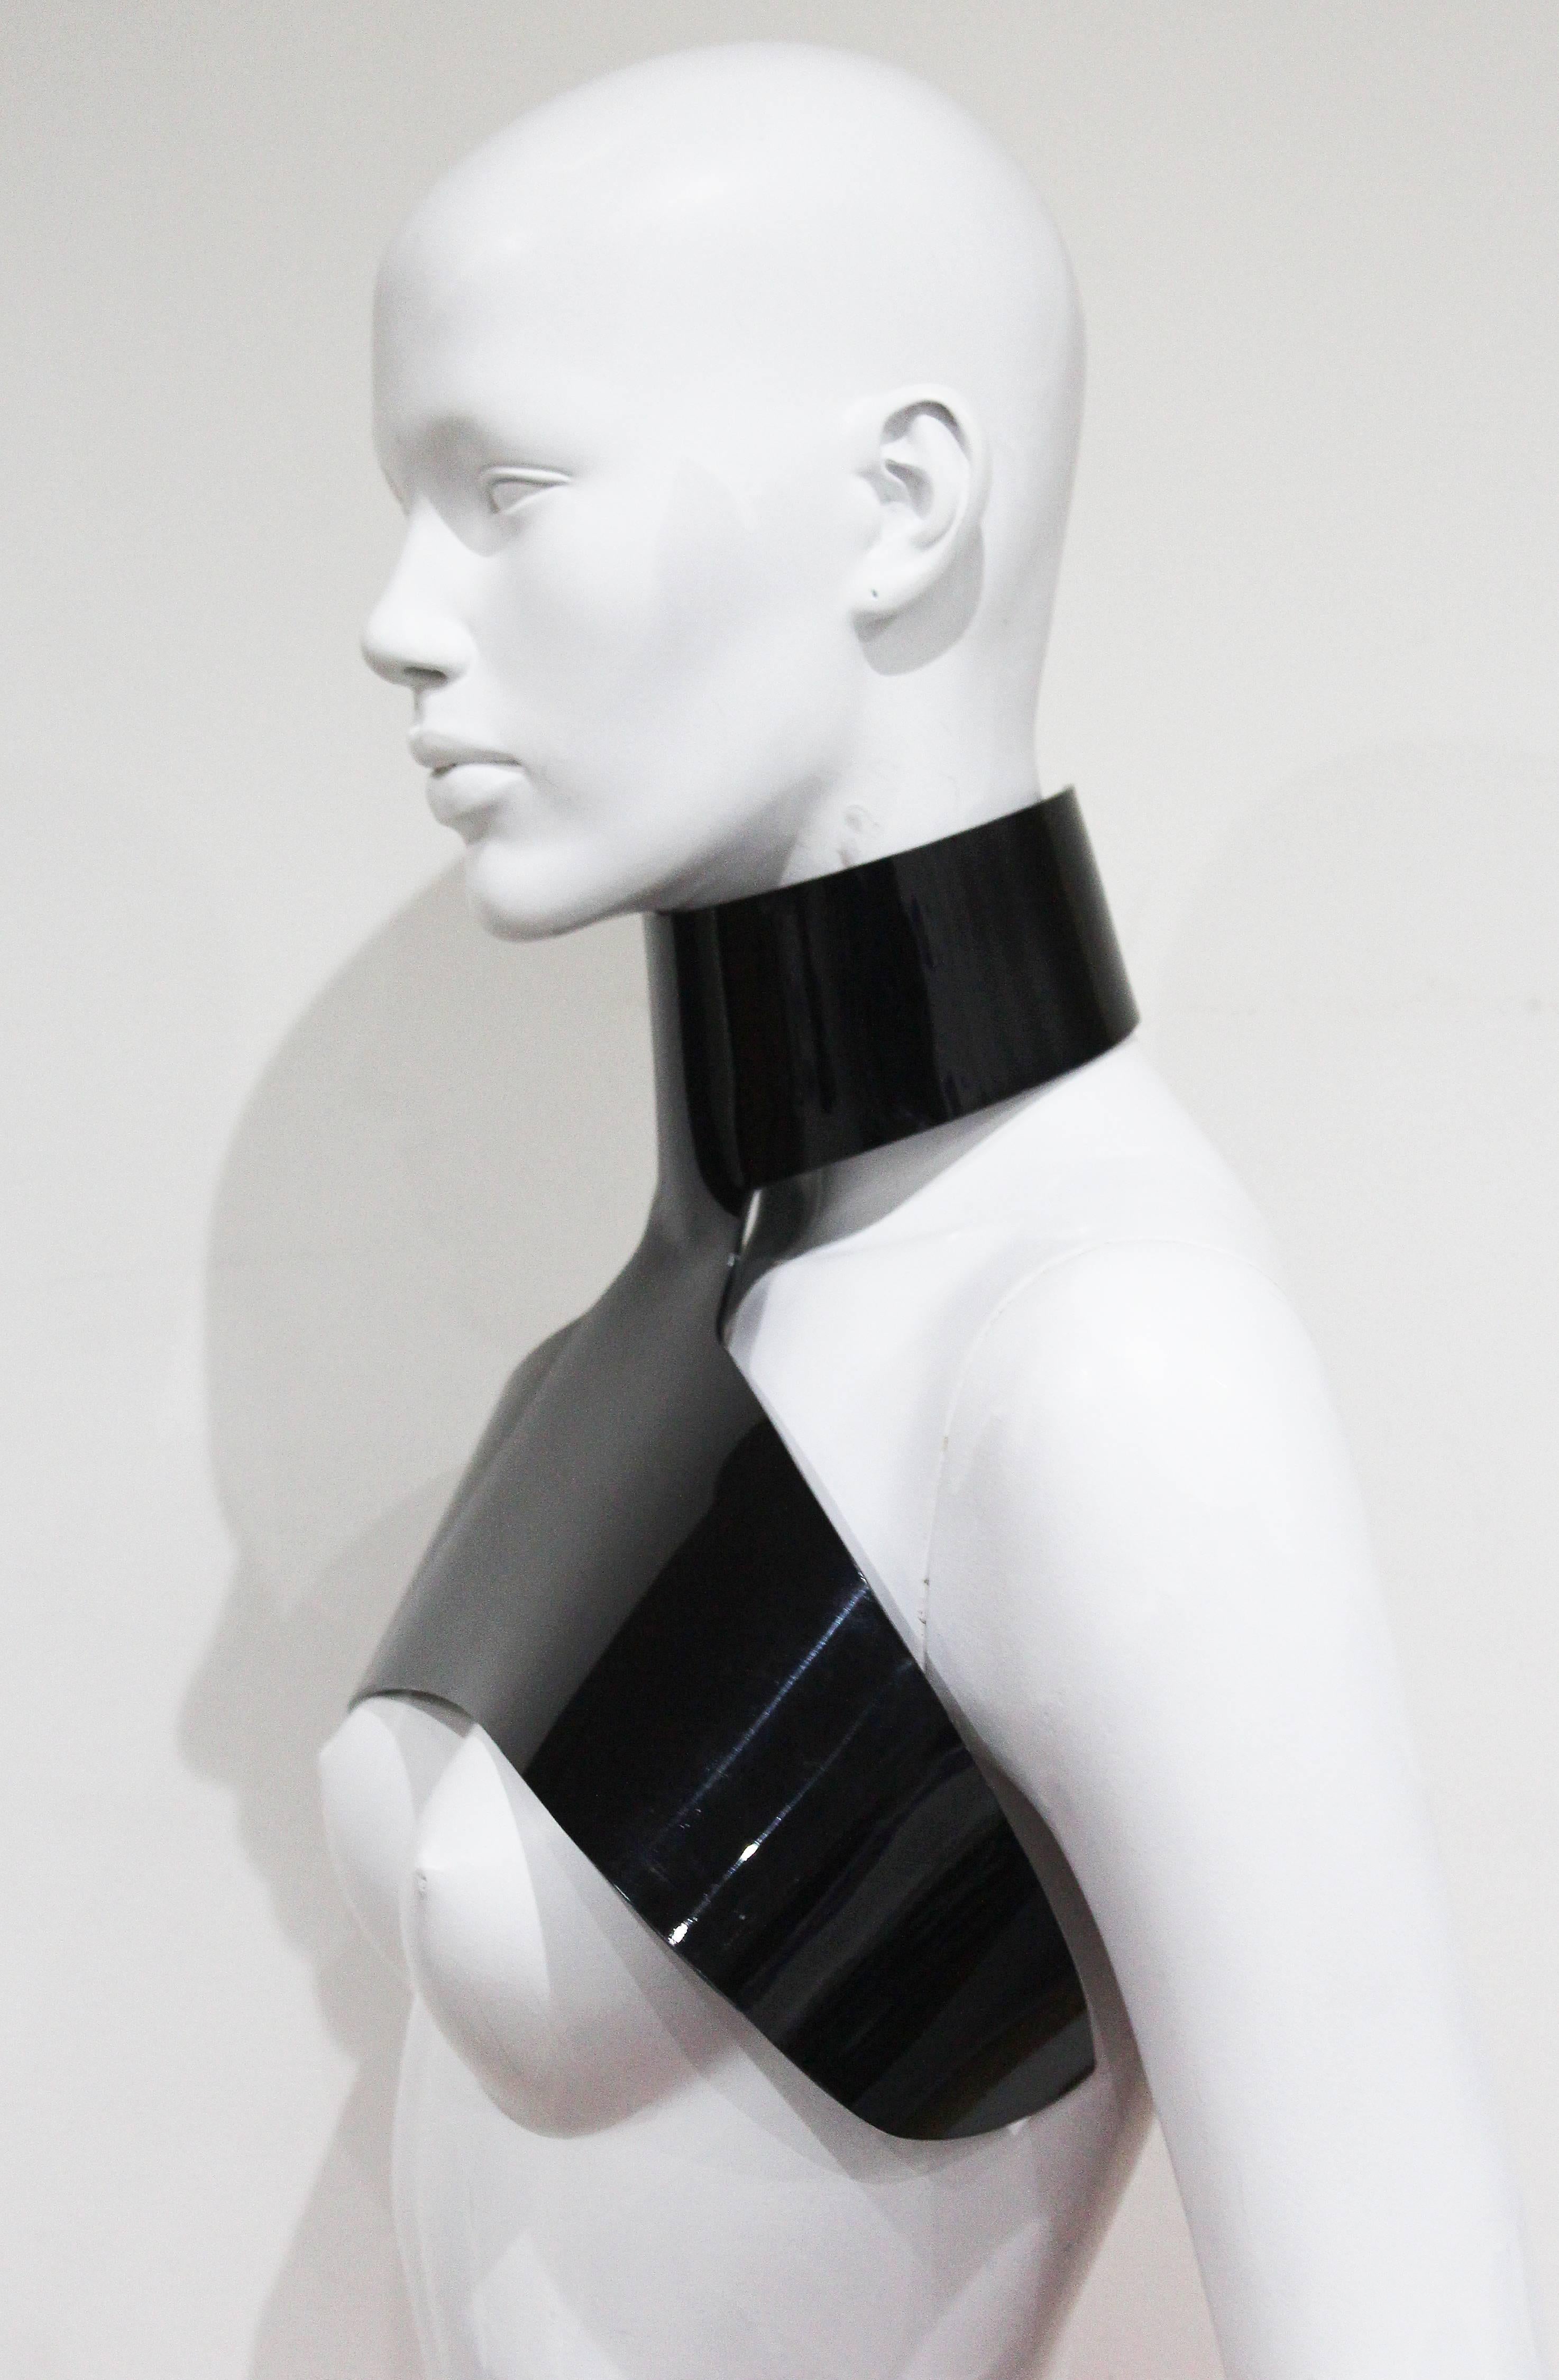 An Yves Saint Laurent by Stefano Pilati harness choker from the Autumn/Winter 2006 collection. The choker wraps around the neck and under the arms just above the bust. 

XS - Small 